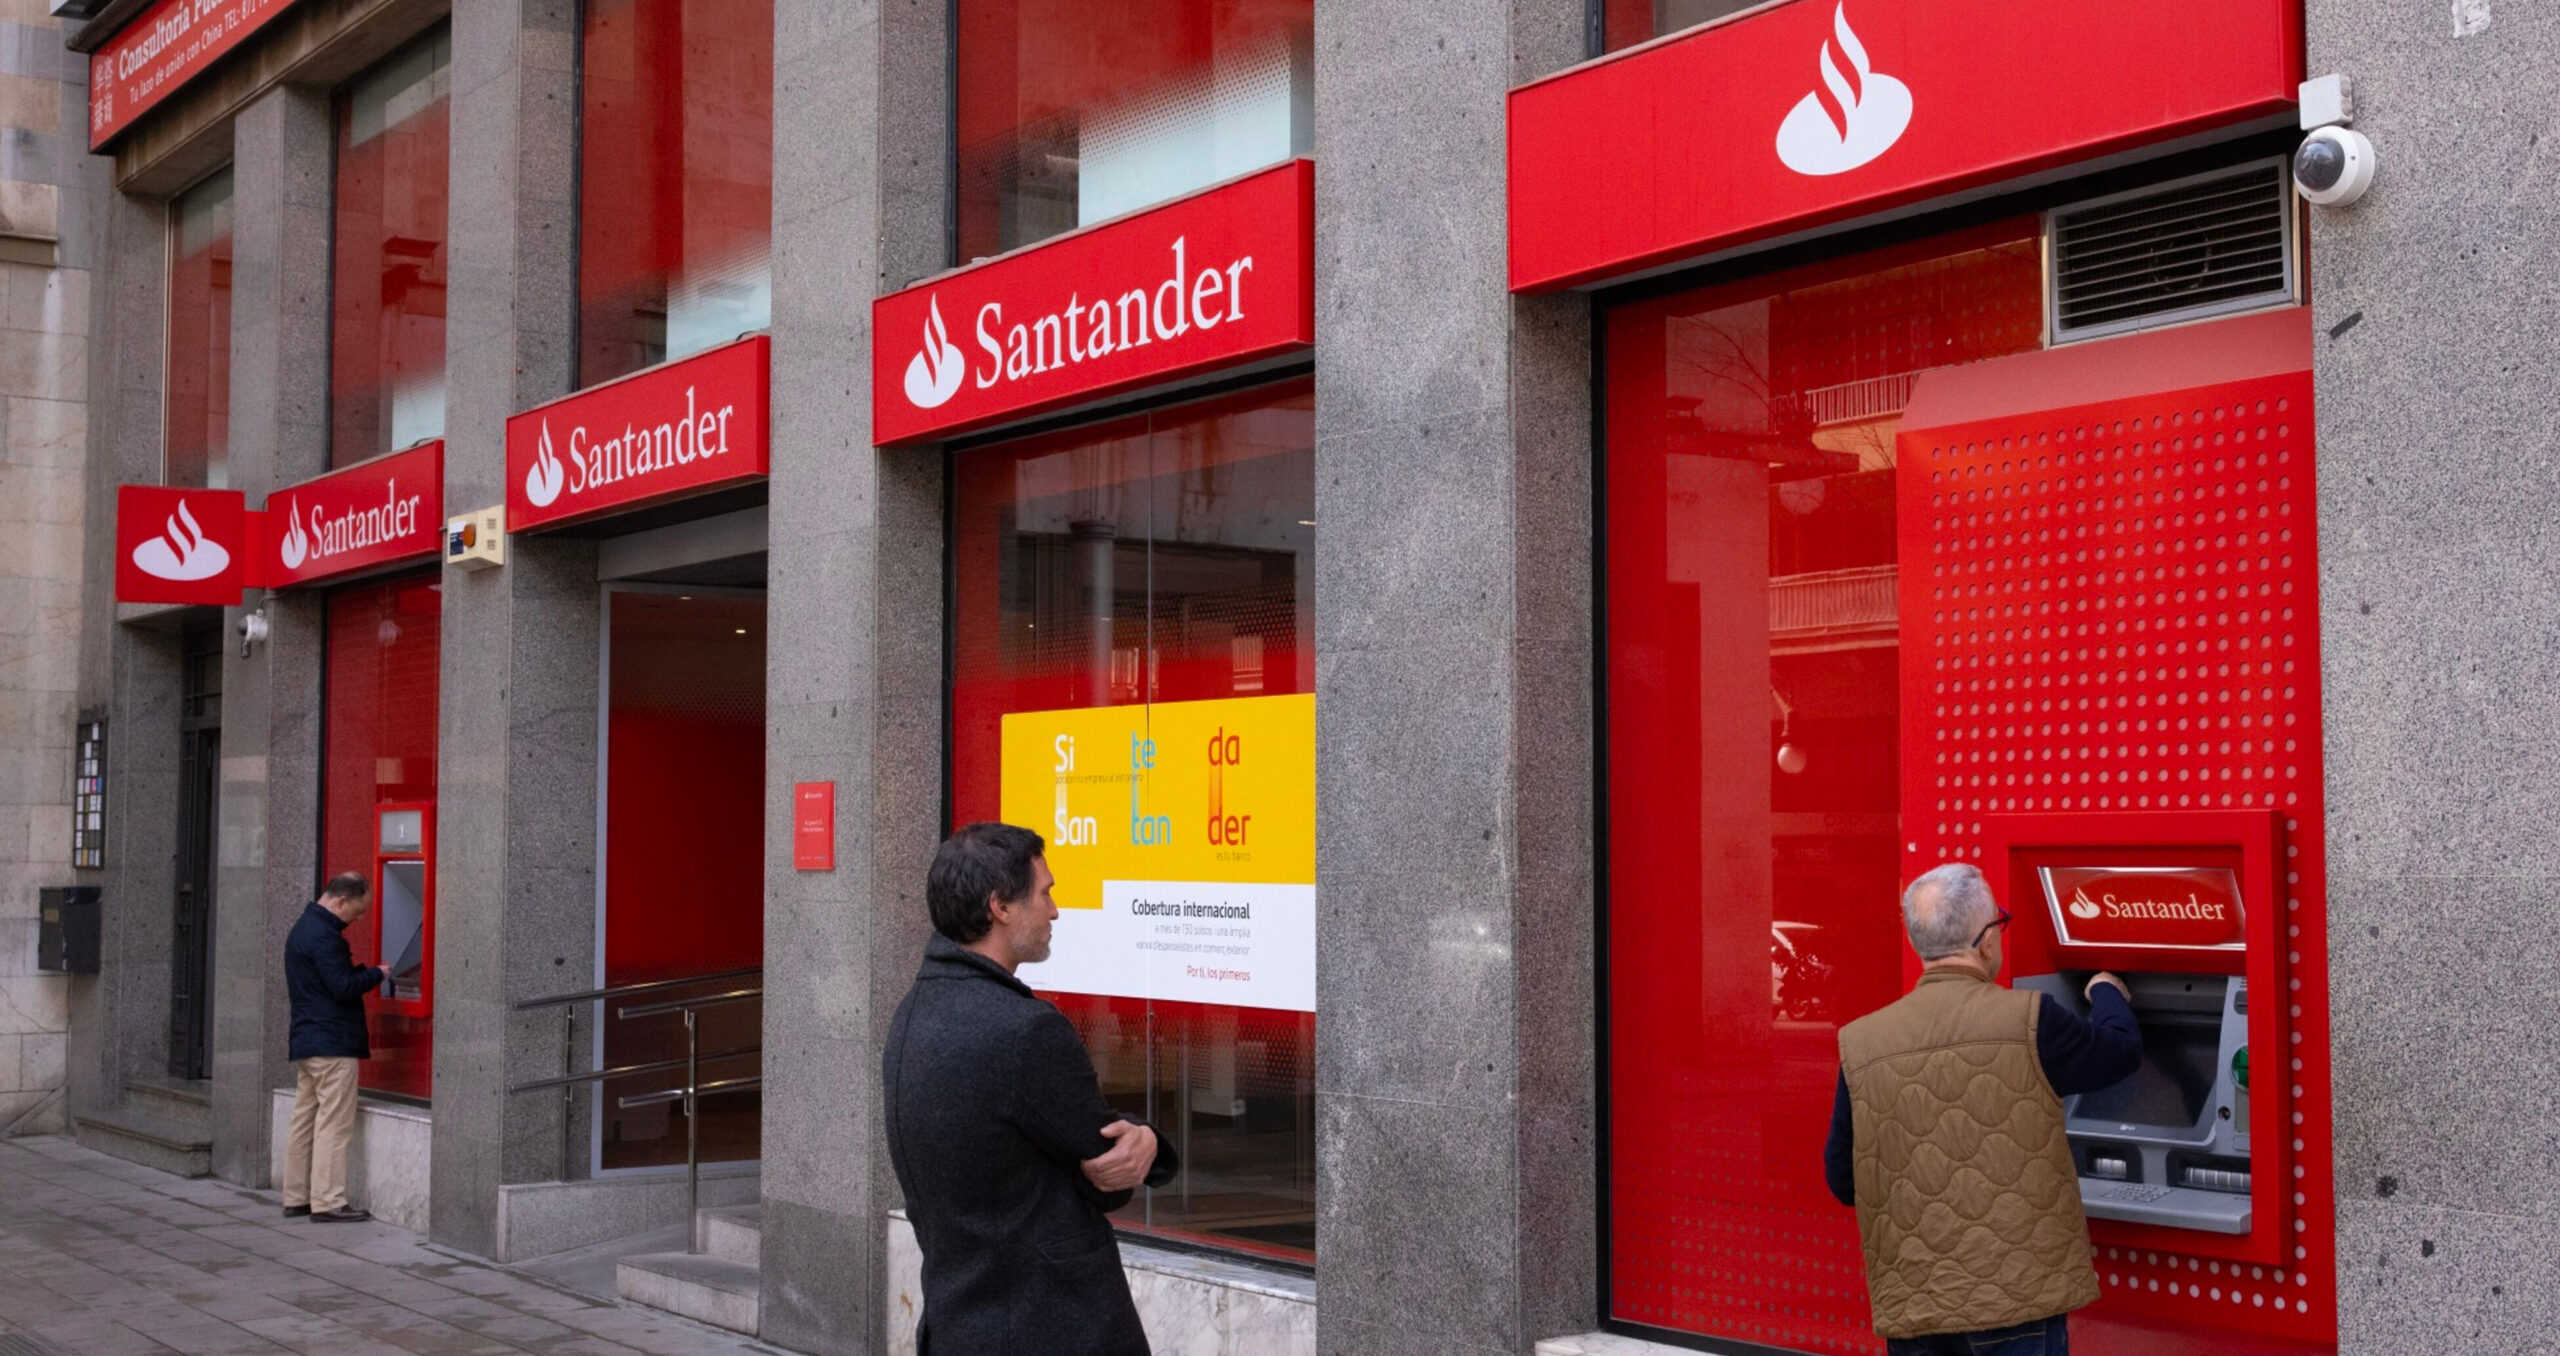 Banco Santander ranked first in BNEF’s assessment of 10 large banks, with its financing of low-carbon energy supply almost double its financing of fossil fuels. (Photo: Andrey Rudakov/Bloomberg) 